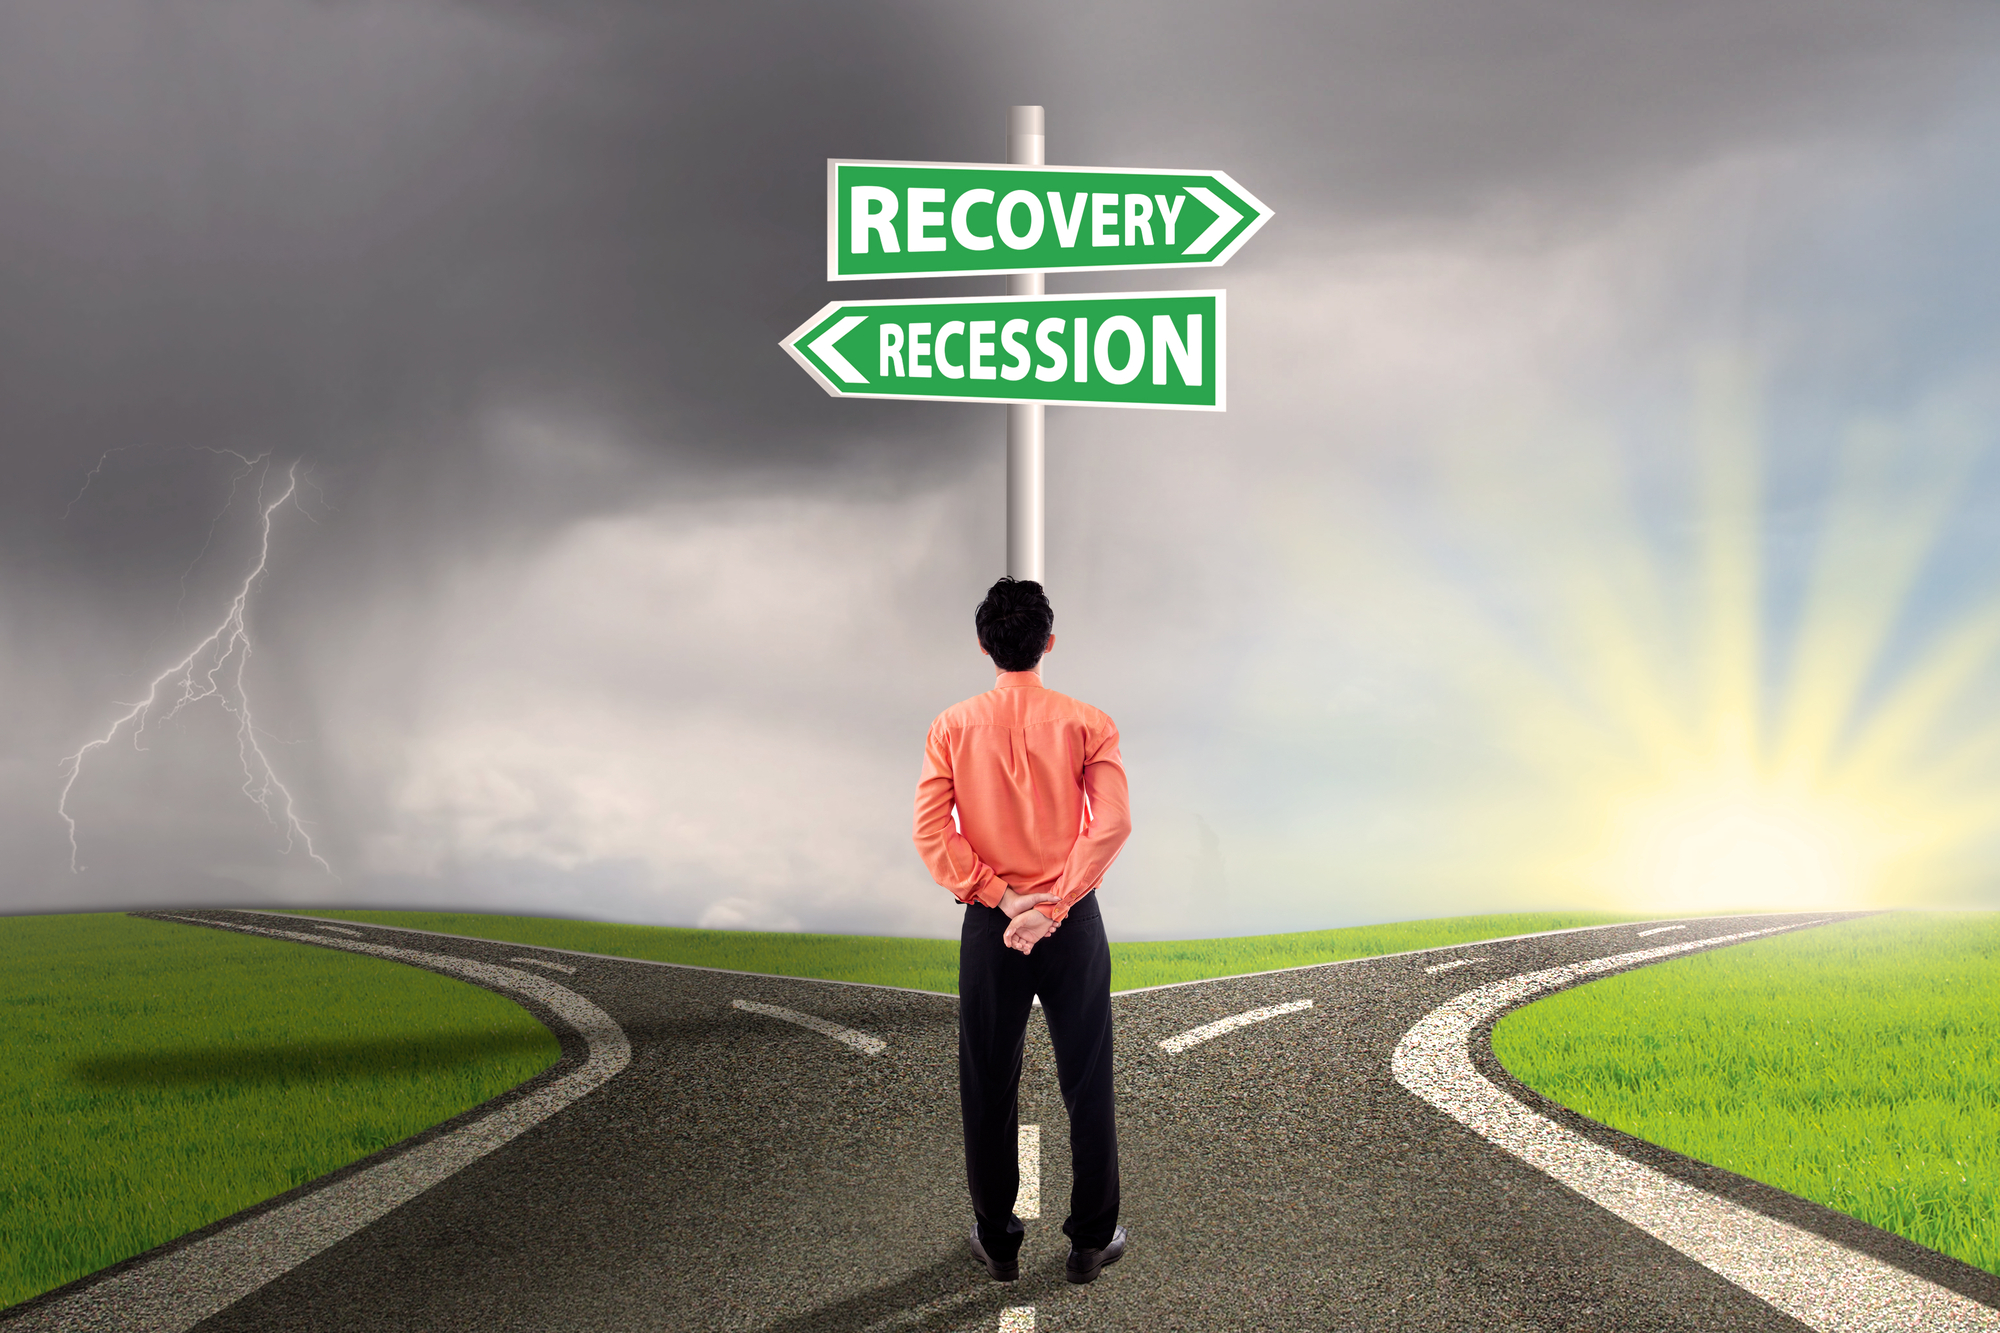 5 Ways to Recession-Proof Your Business - Barbara Weltman